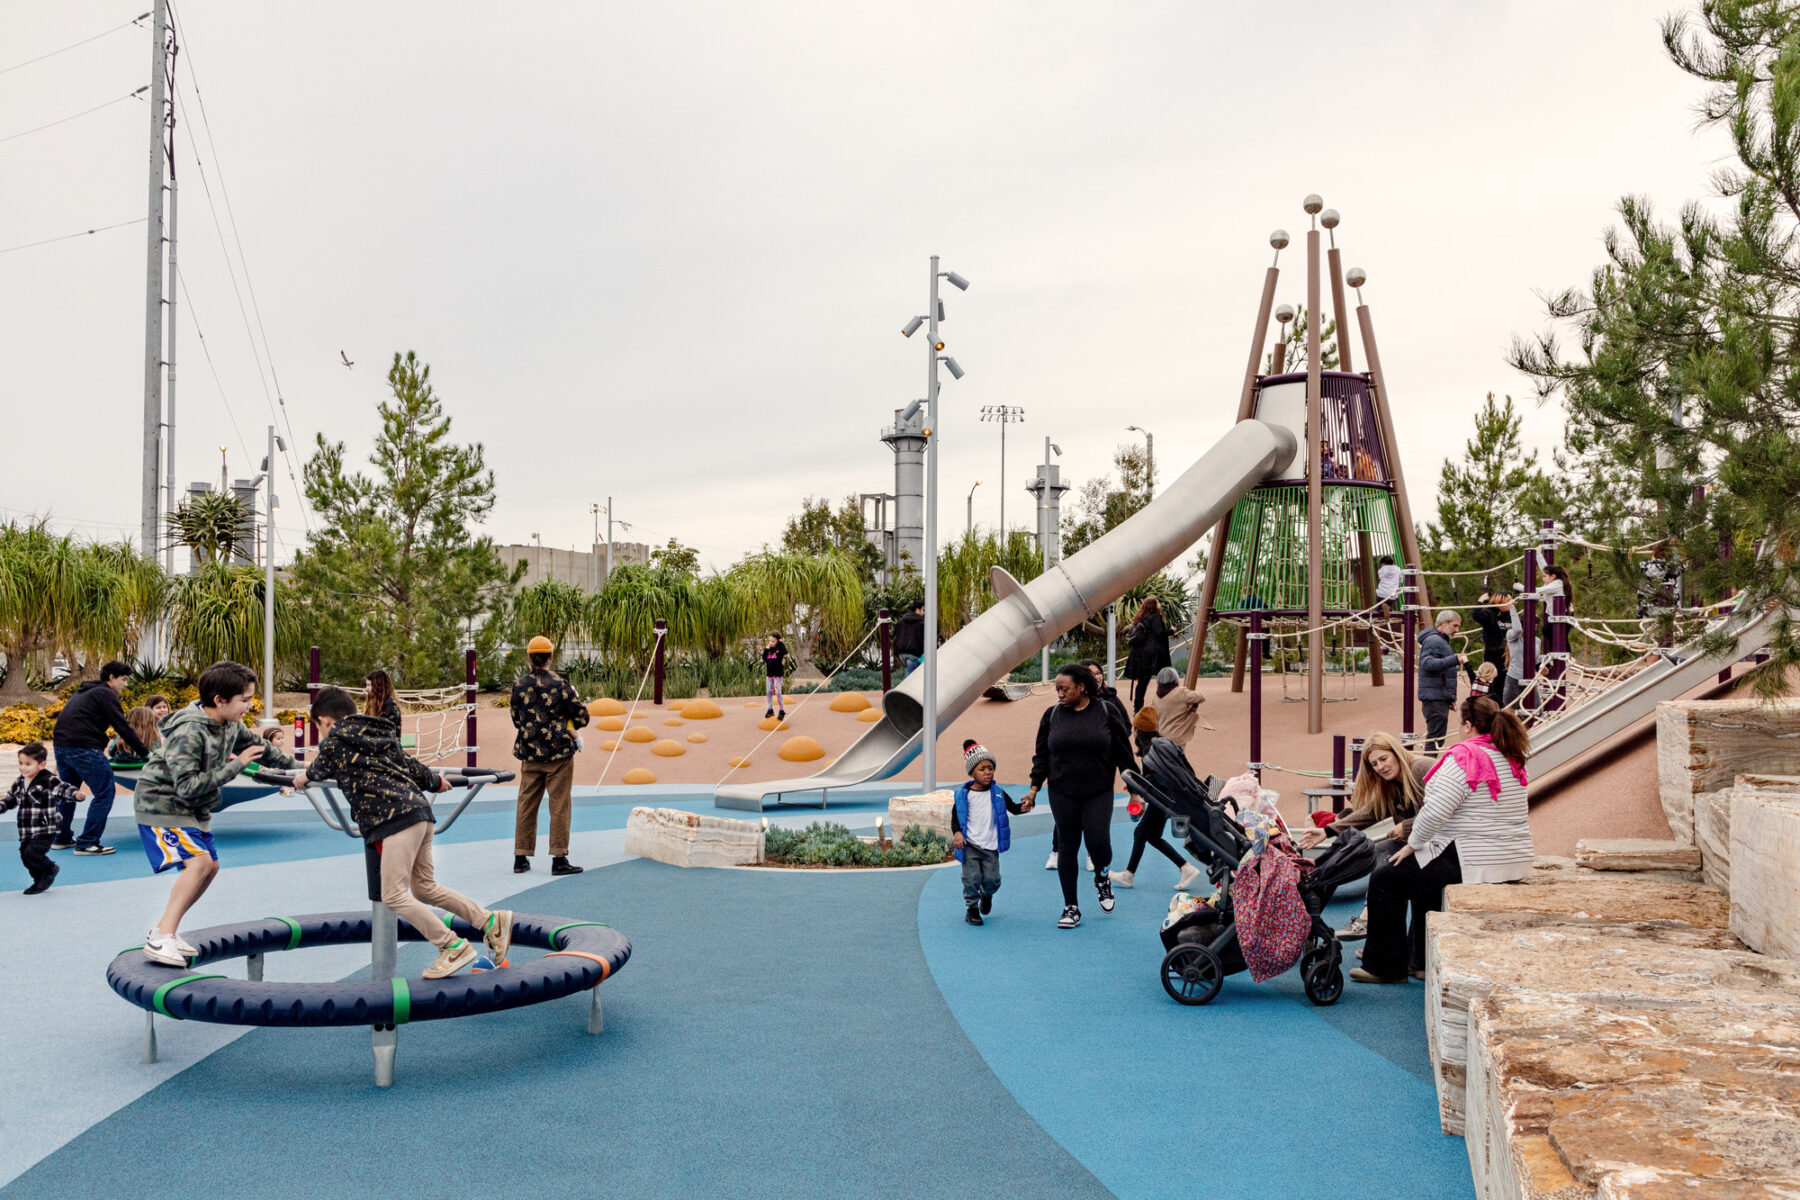 photo of the playground with children and families enjoying the playscape elements